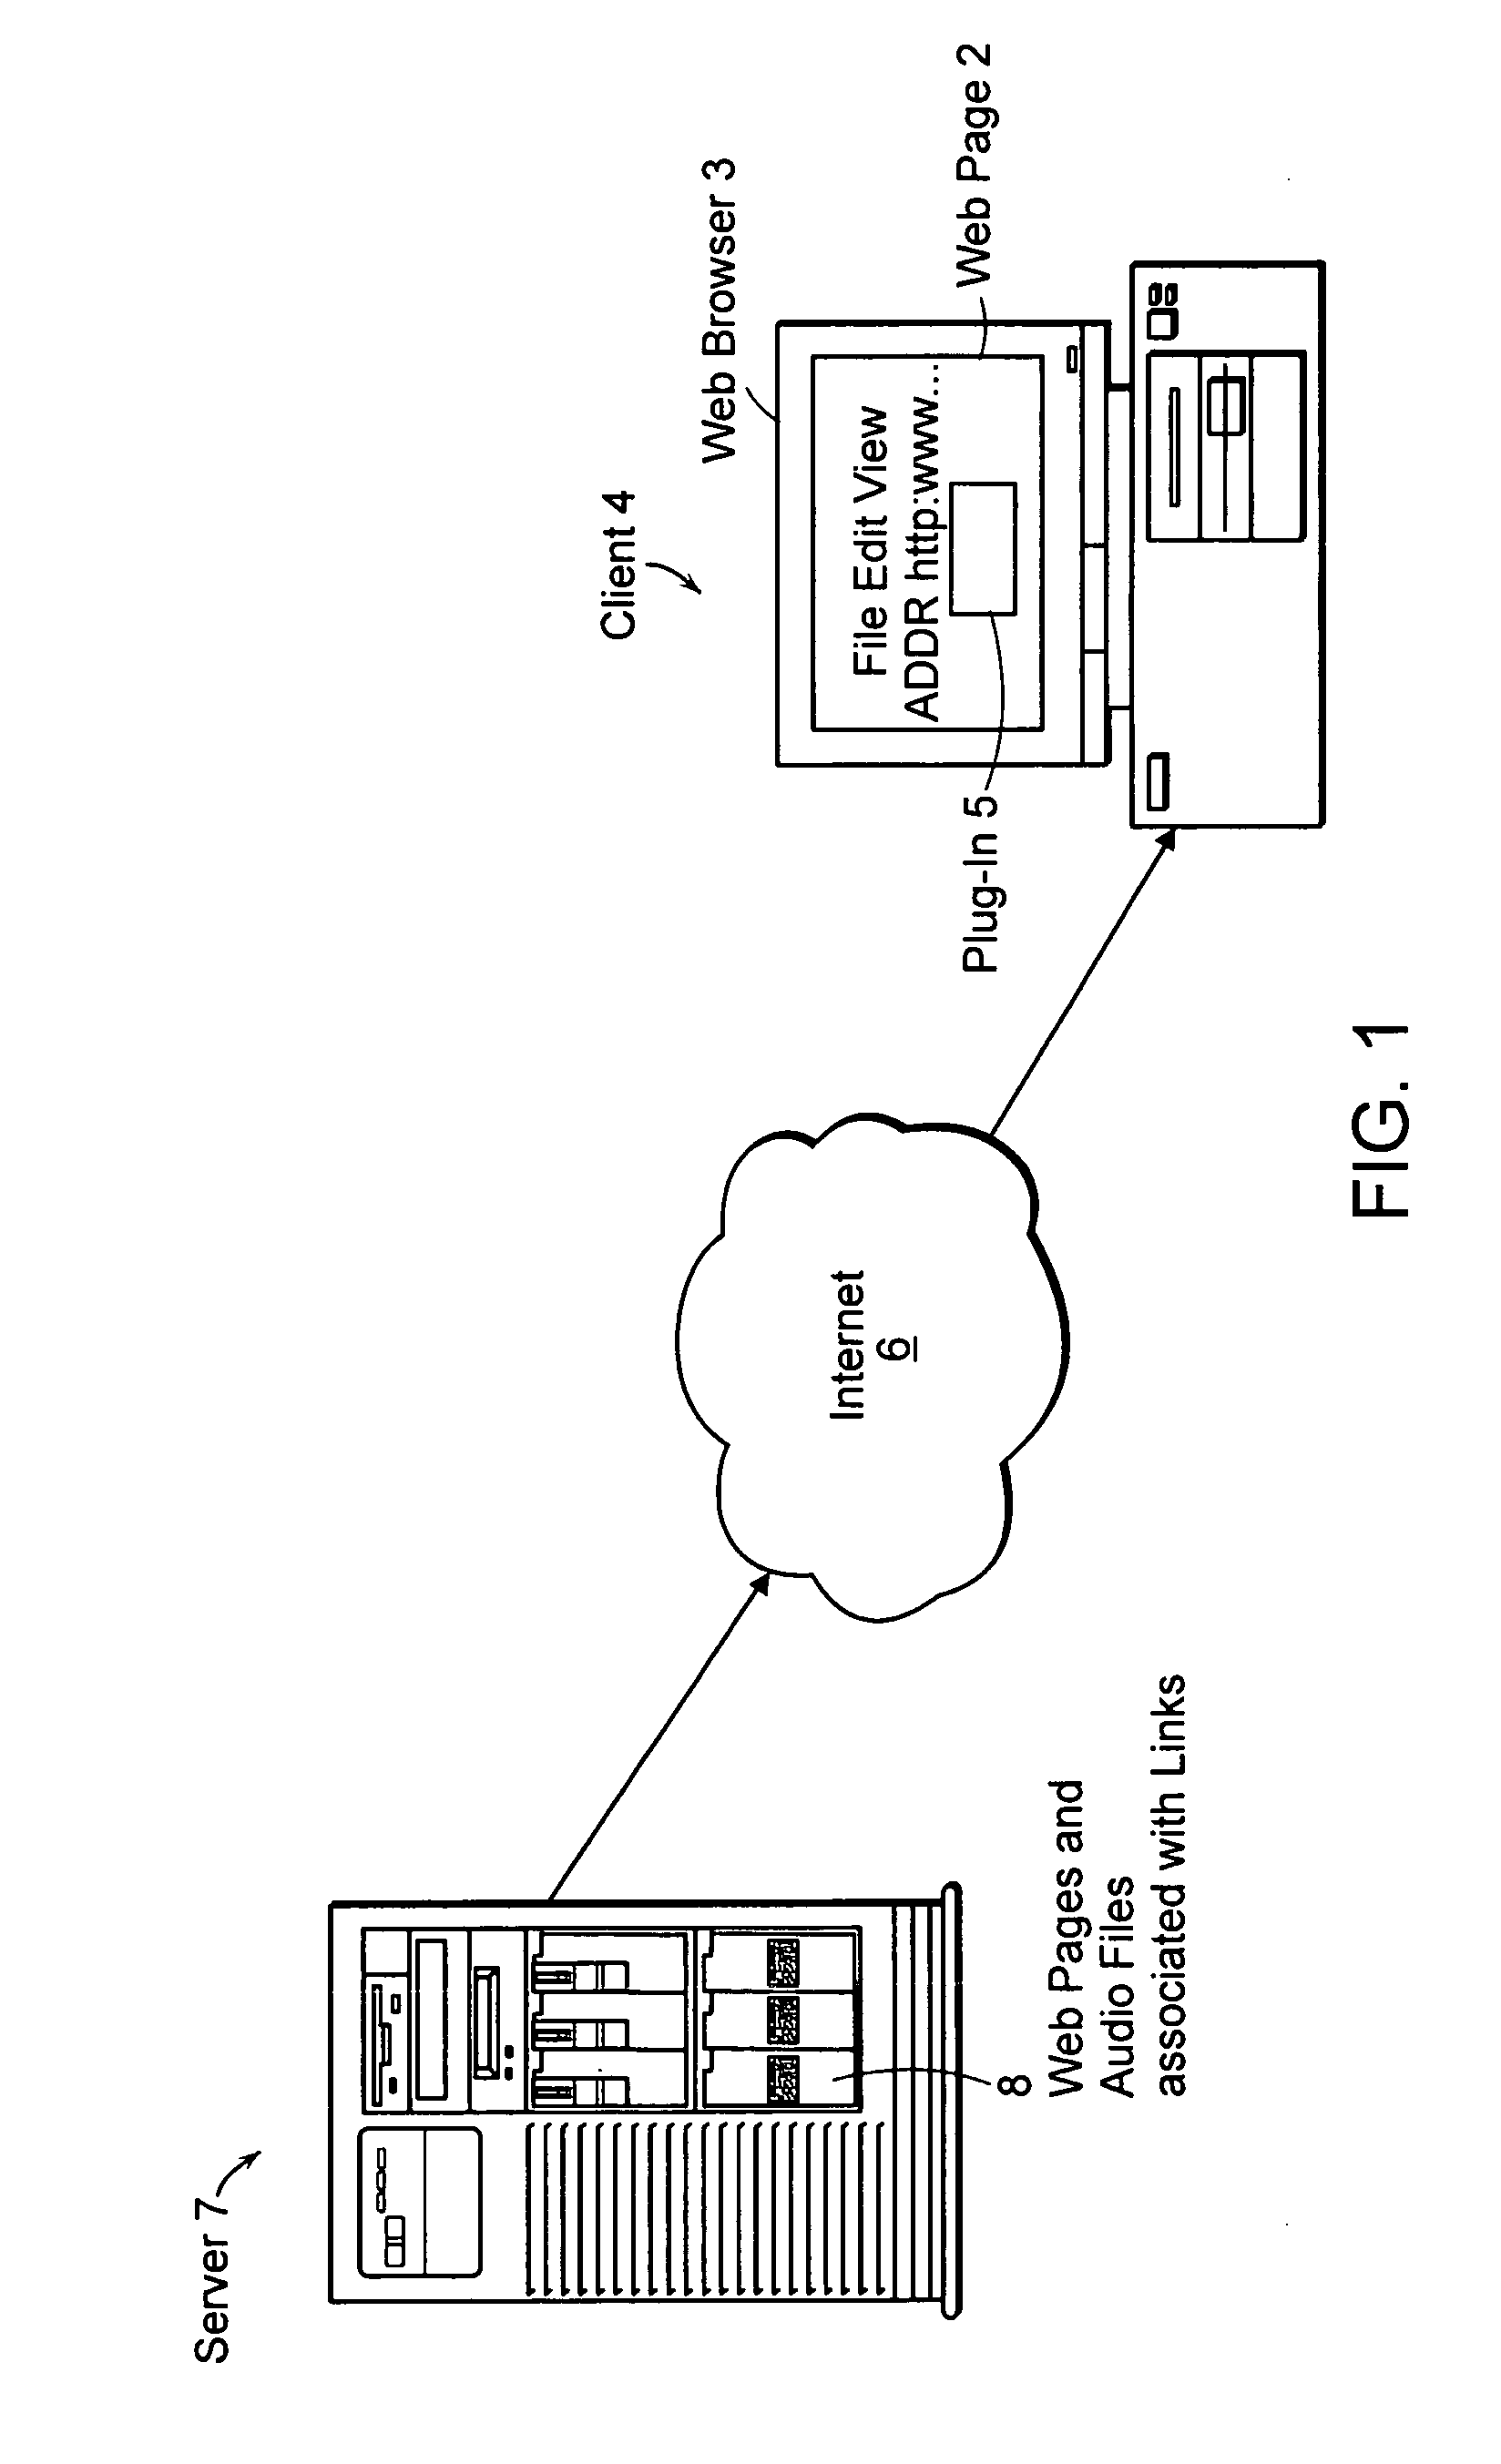 System and method for providing pre-encoded audio content to a television in a communications network